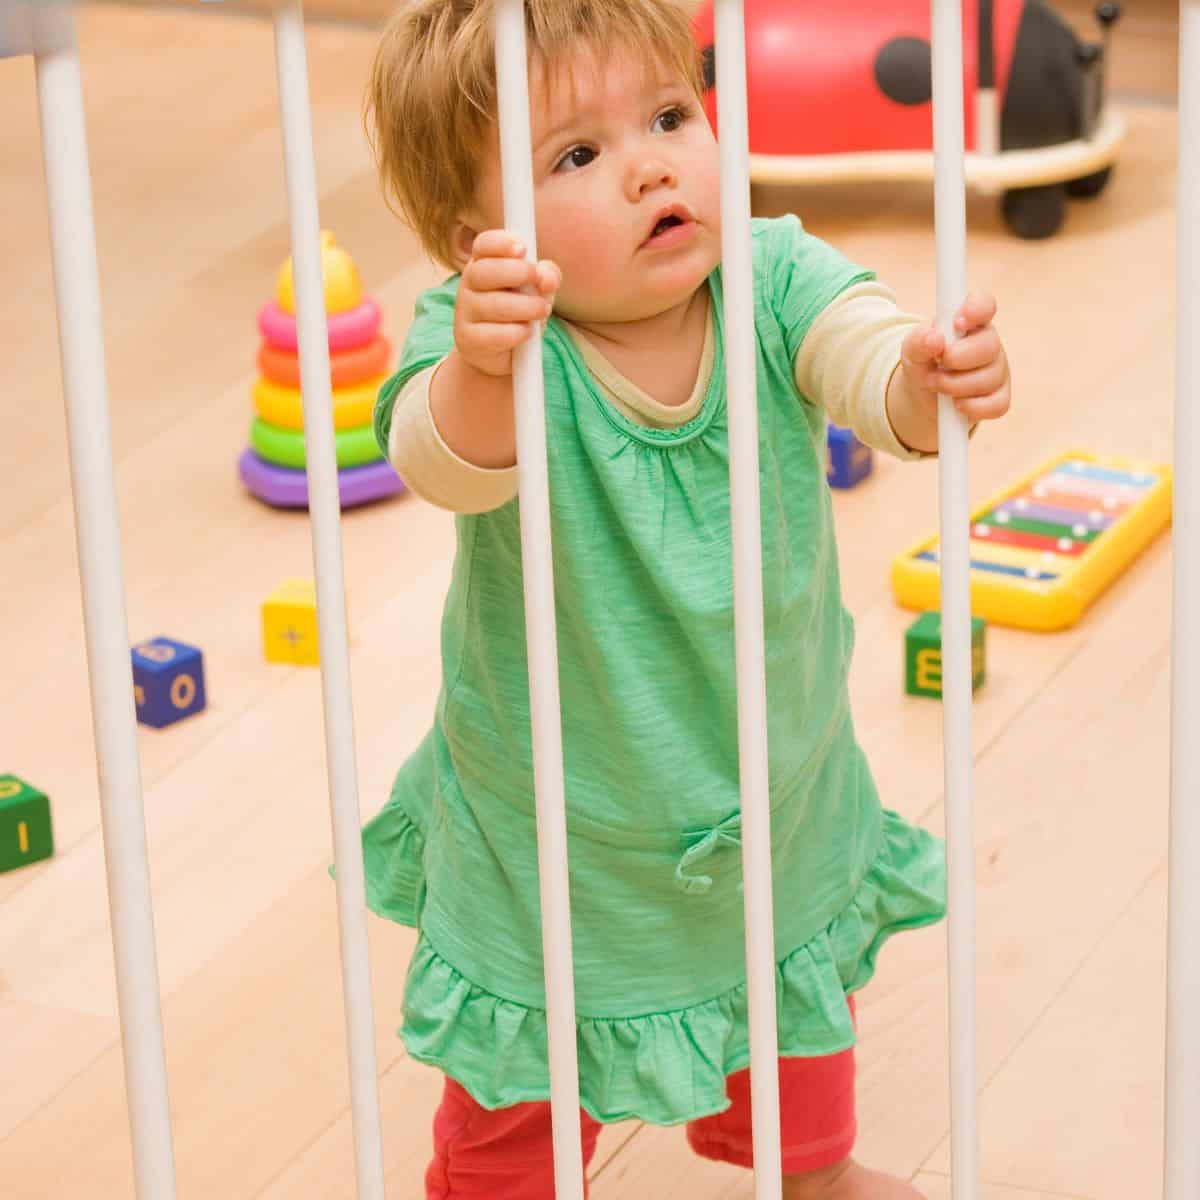 Baby standing at gate of playpen with toys in the background.